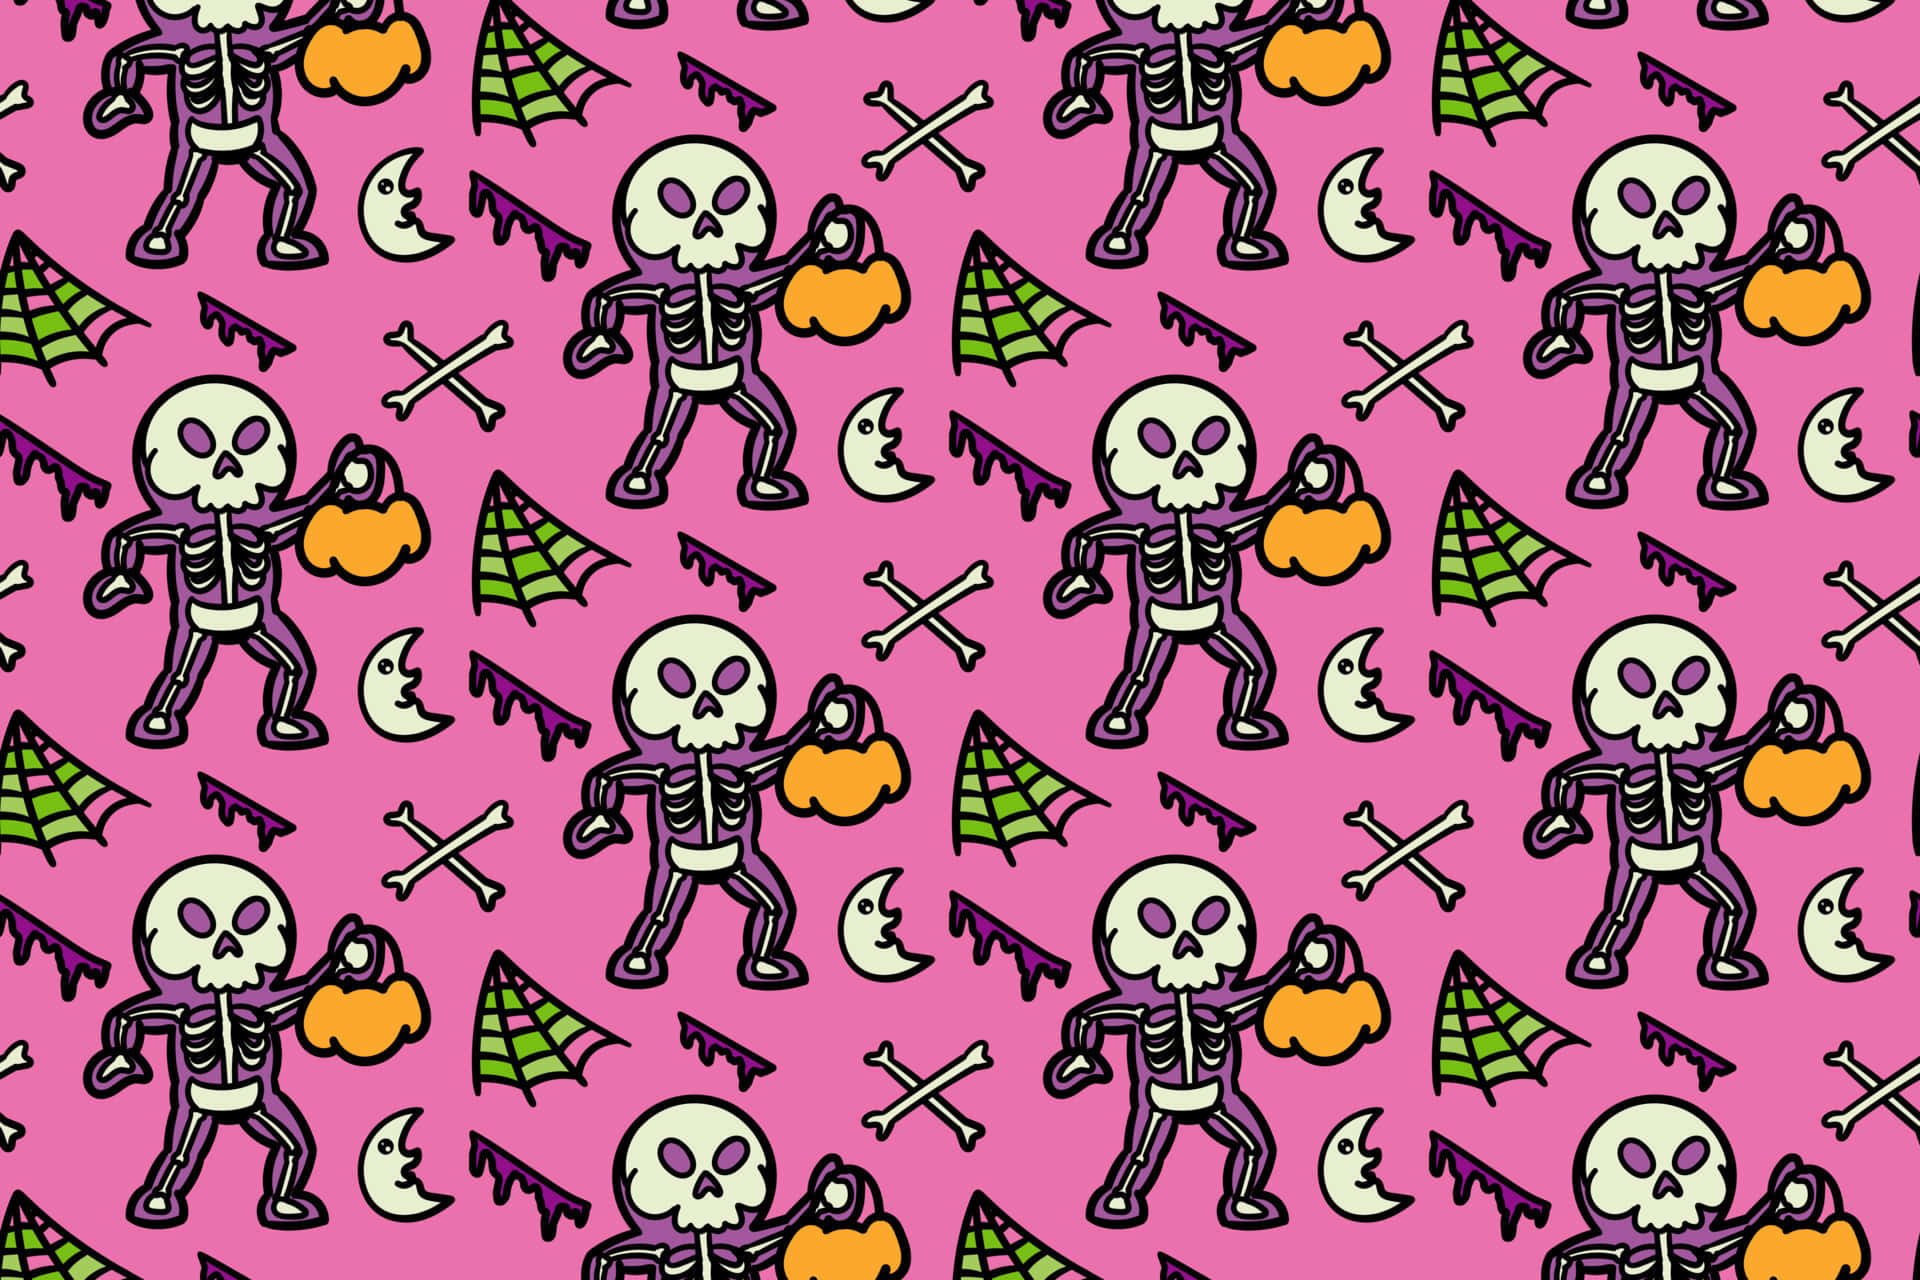 Get Into the Halloween Spirit With Spooky Skeleton Costumes Wallpaper